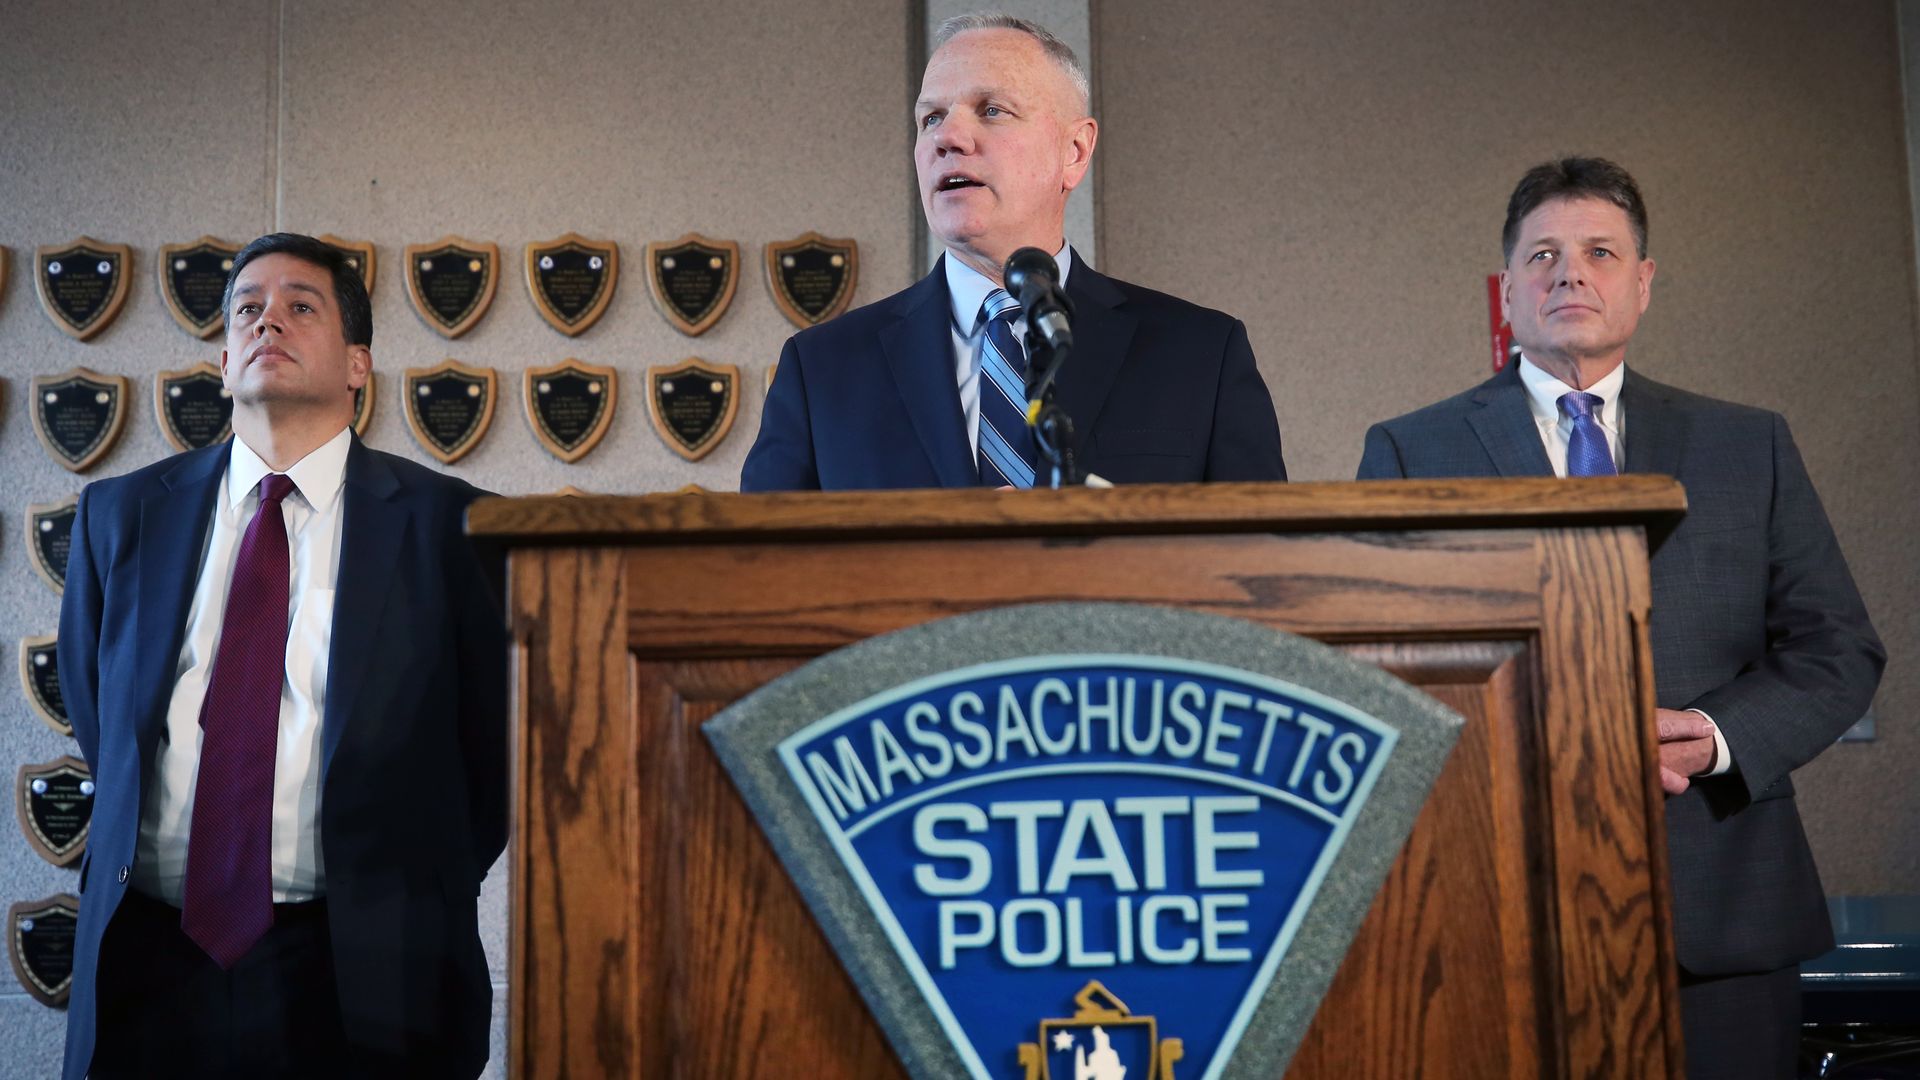 Then-Massachusetts State Police Col. Chris Mason stands at a podium giving an update in 2020 on disciplinary measures against former Troop E members.